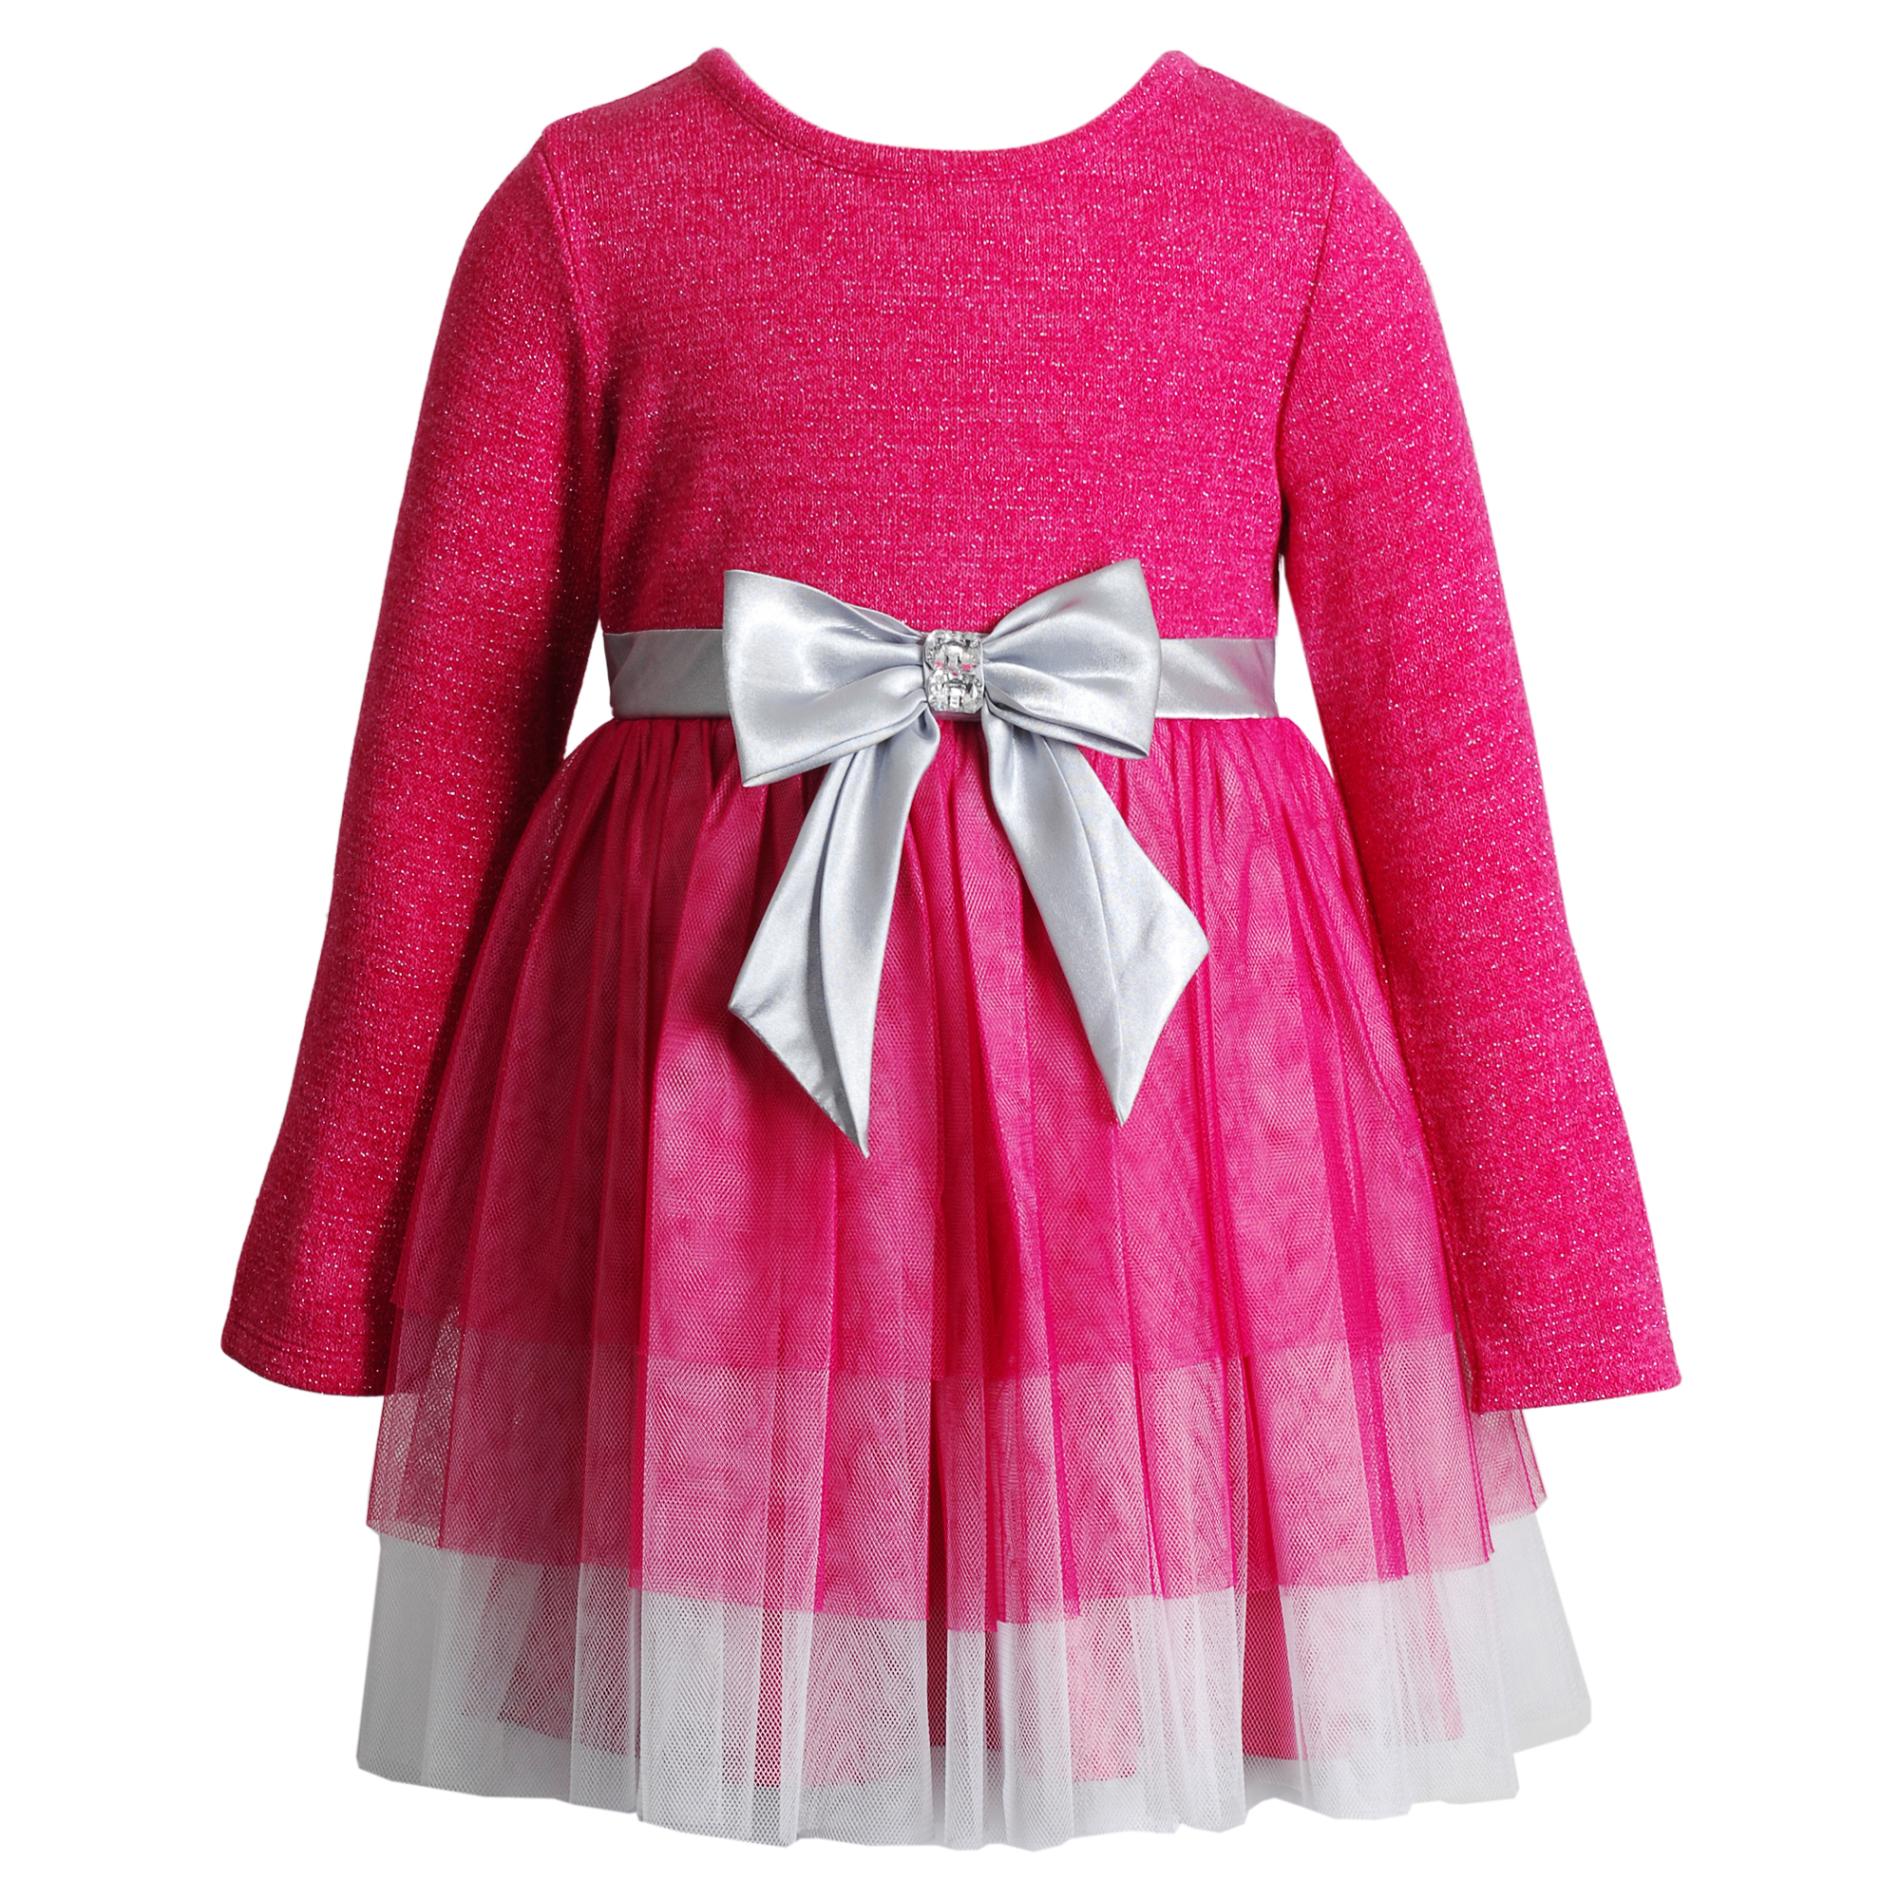 Youngland Infant & Toddler Girl's Sparkle Party Dress